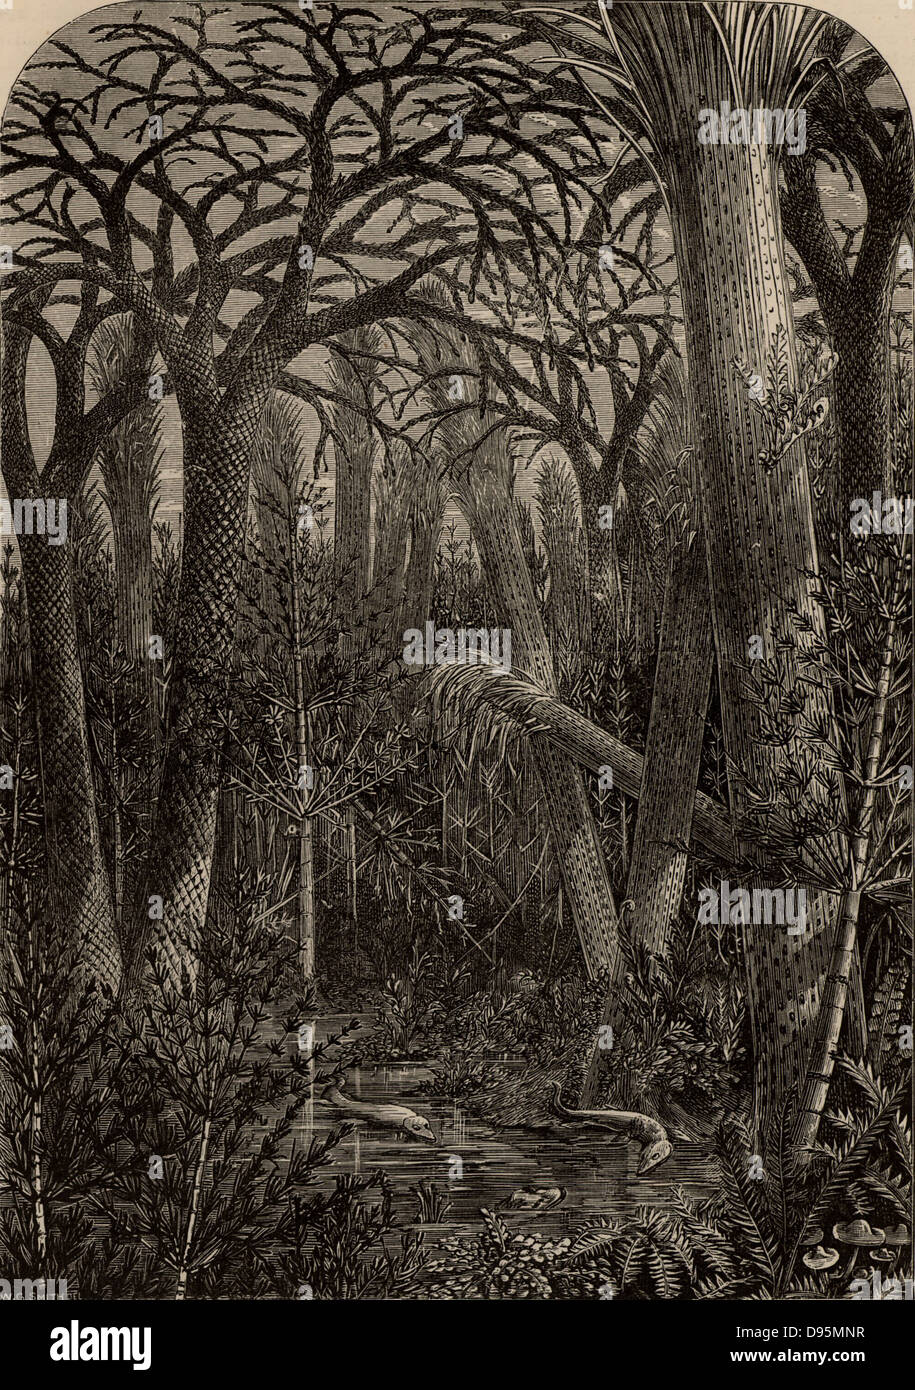 Artist's reconstruction of a forest during the Carboniferous period.  From 'Science for All' by Robert Brown (London, c1880).  Engraving Stock Photo